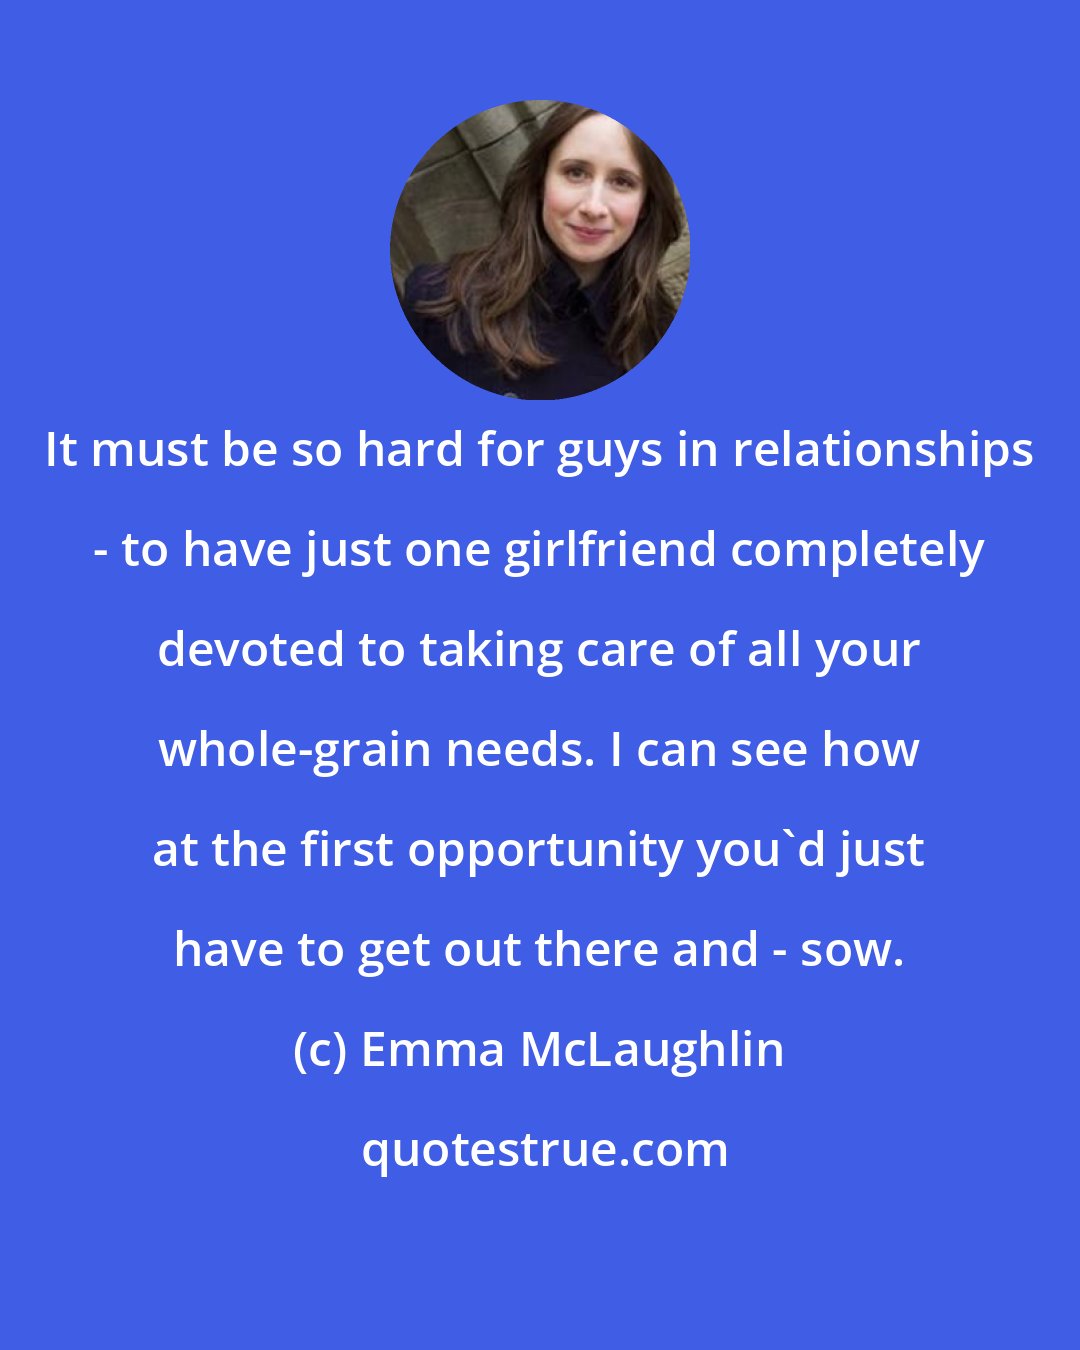 Emma McLaughlin: It must be so hard for guys in relationships - to have just one girlfriend completely devoted to taking care of all your whole-grain needs. I can see how at the first opportunity you'd just have to get out there and - sow.